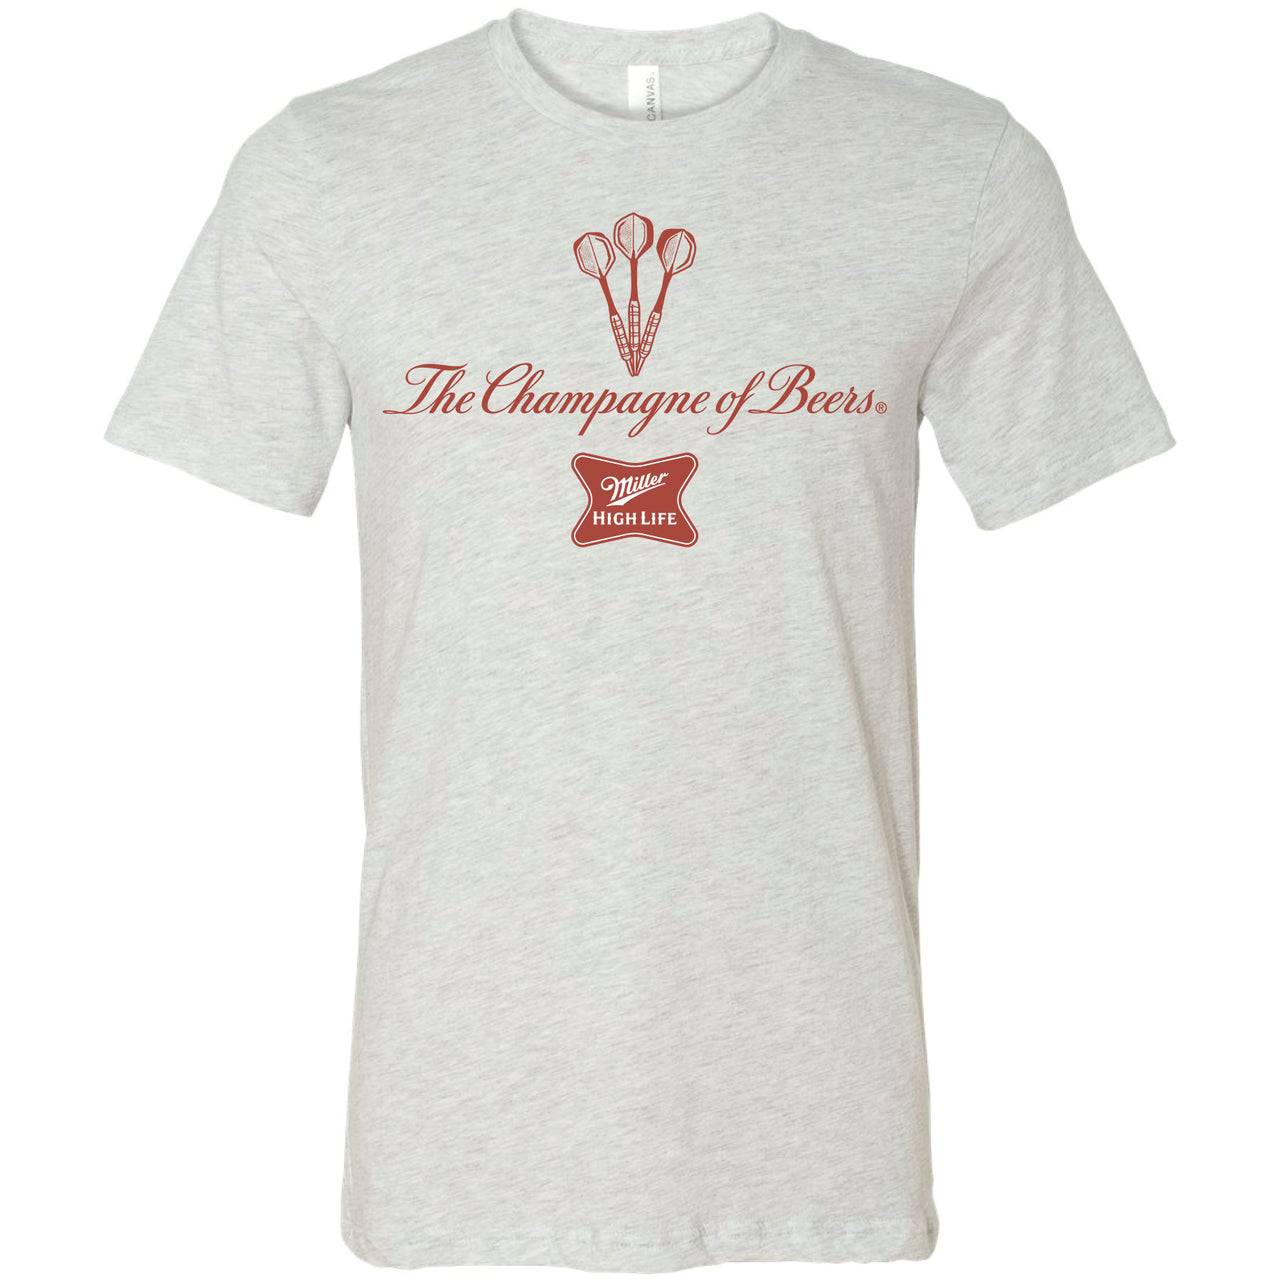 Miller High Life - The Champagne of Beers Darts T-shirt